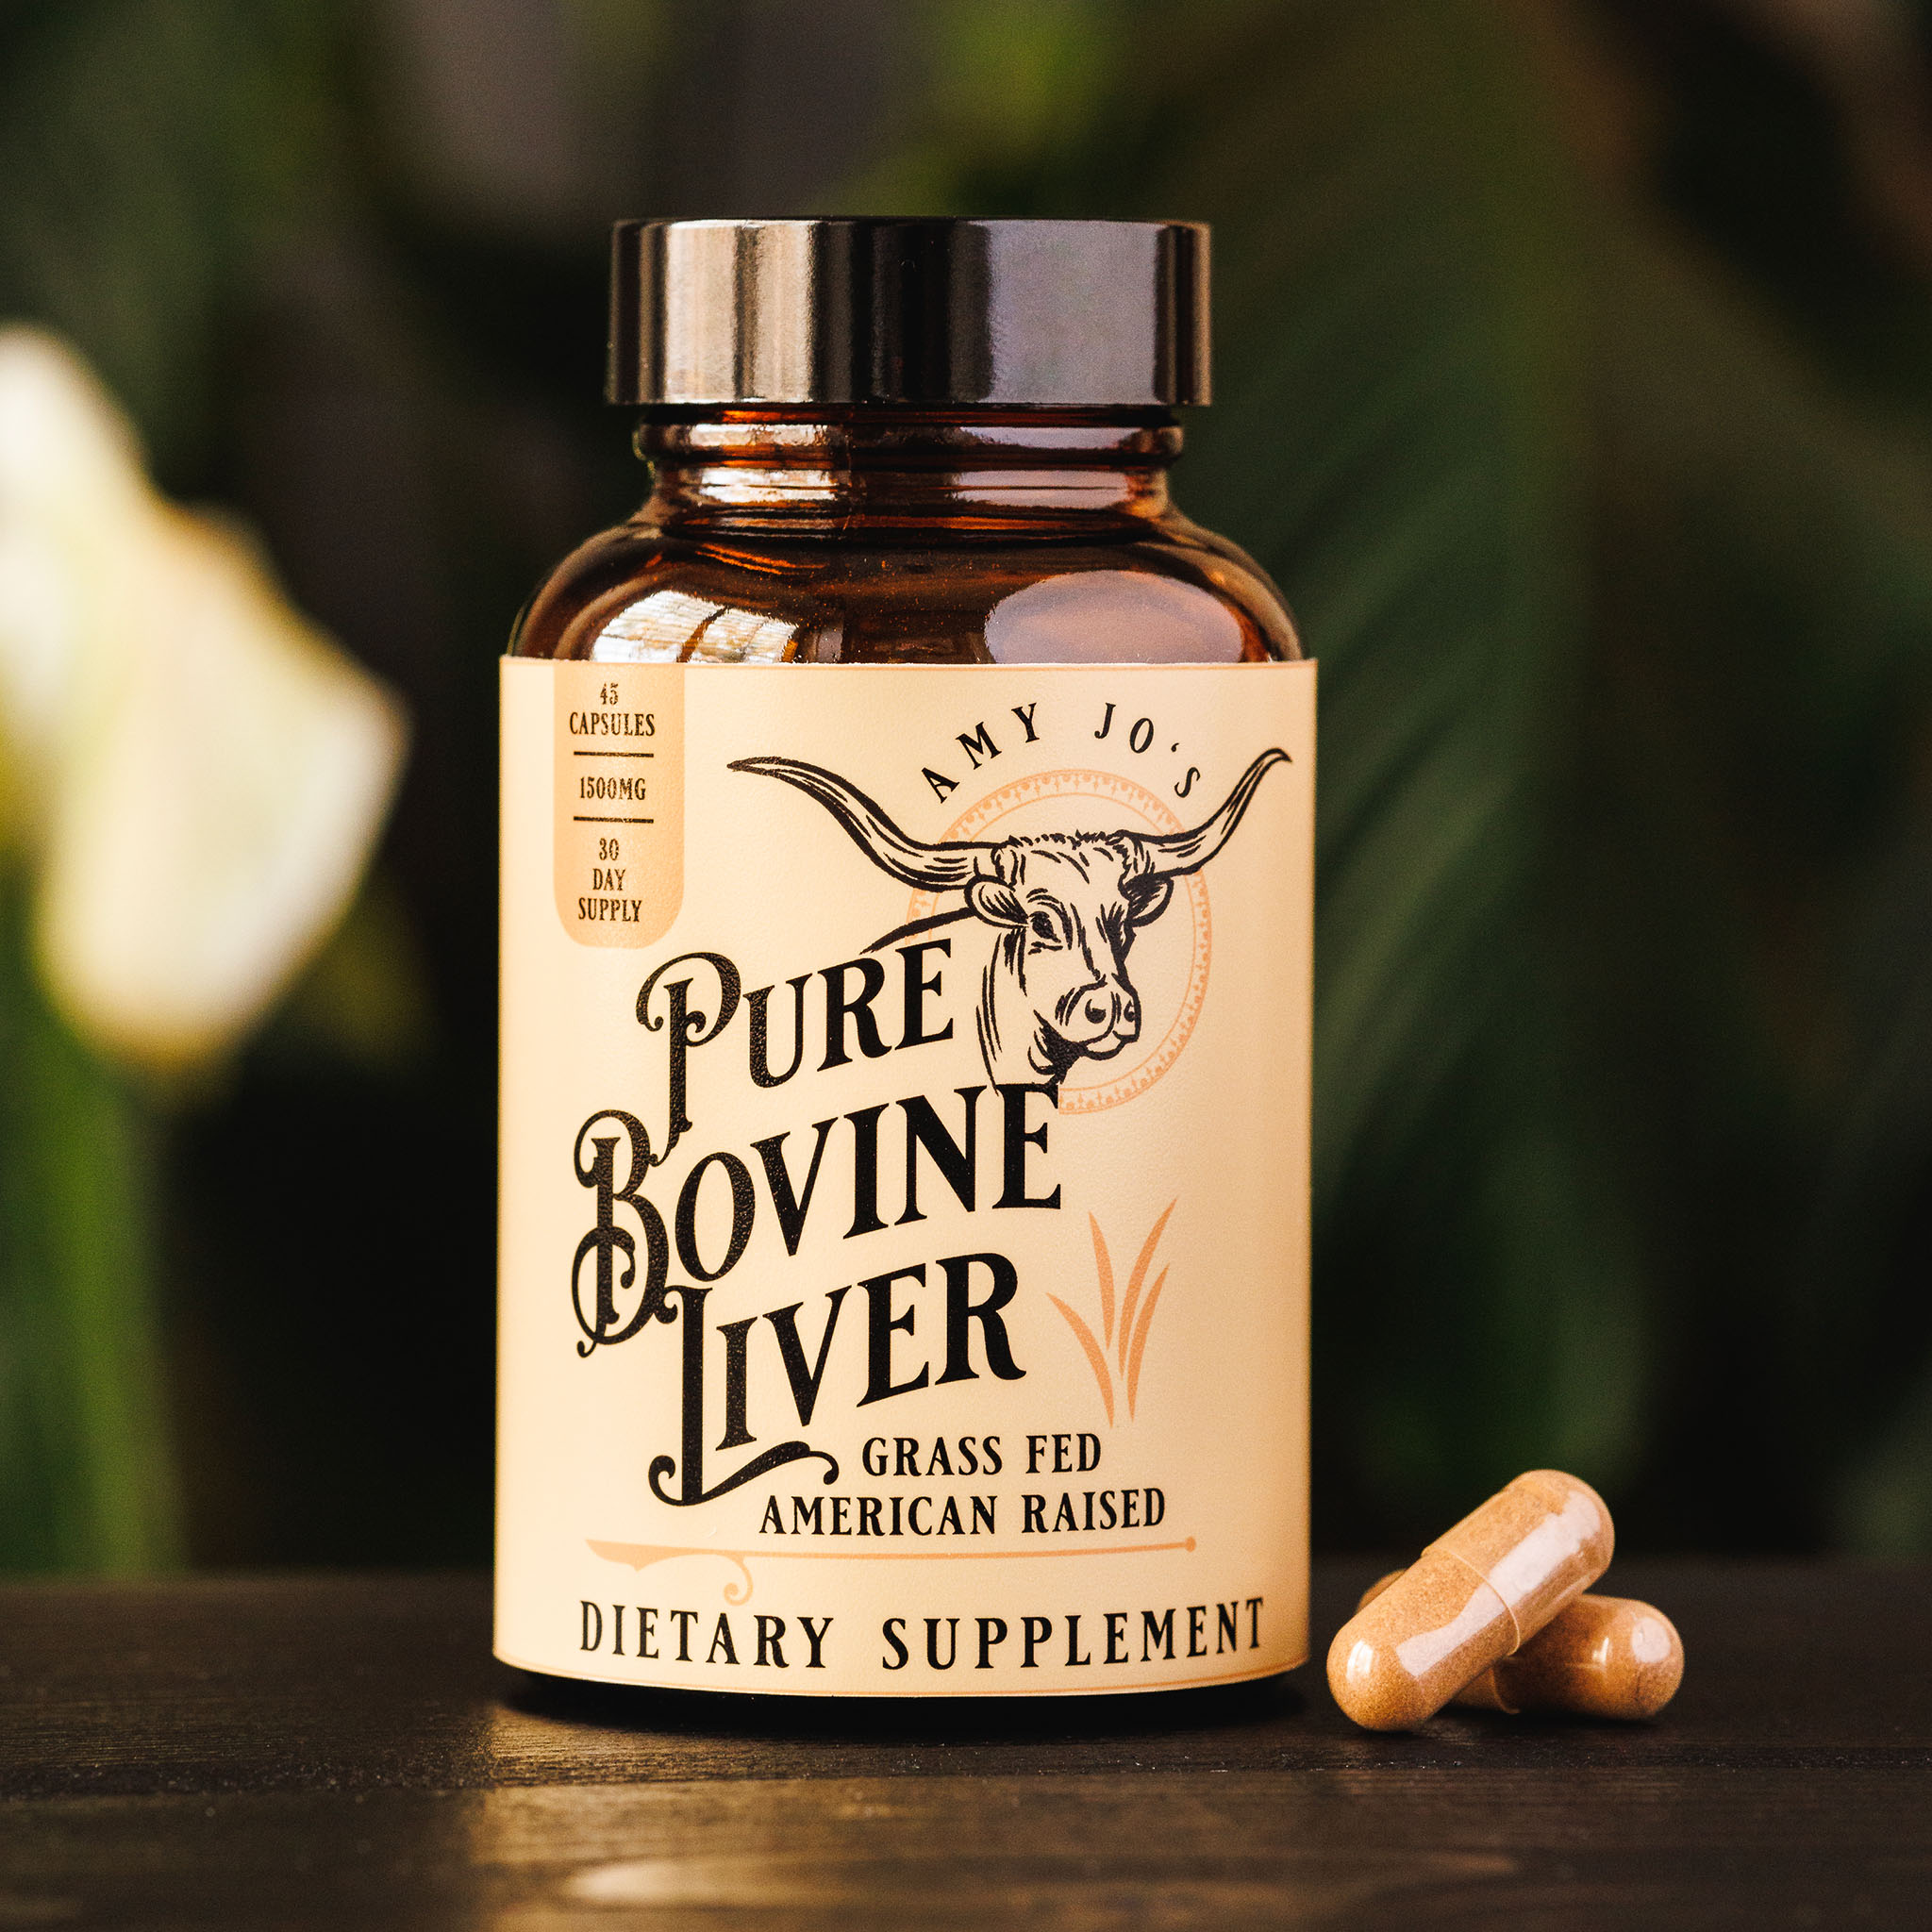 https://amyjos.co/wp-content/uploads/sites/20/2022/04/Product_Pure-Bovine-Liver_1.jpg